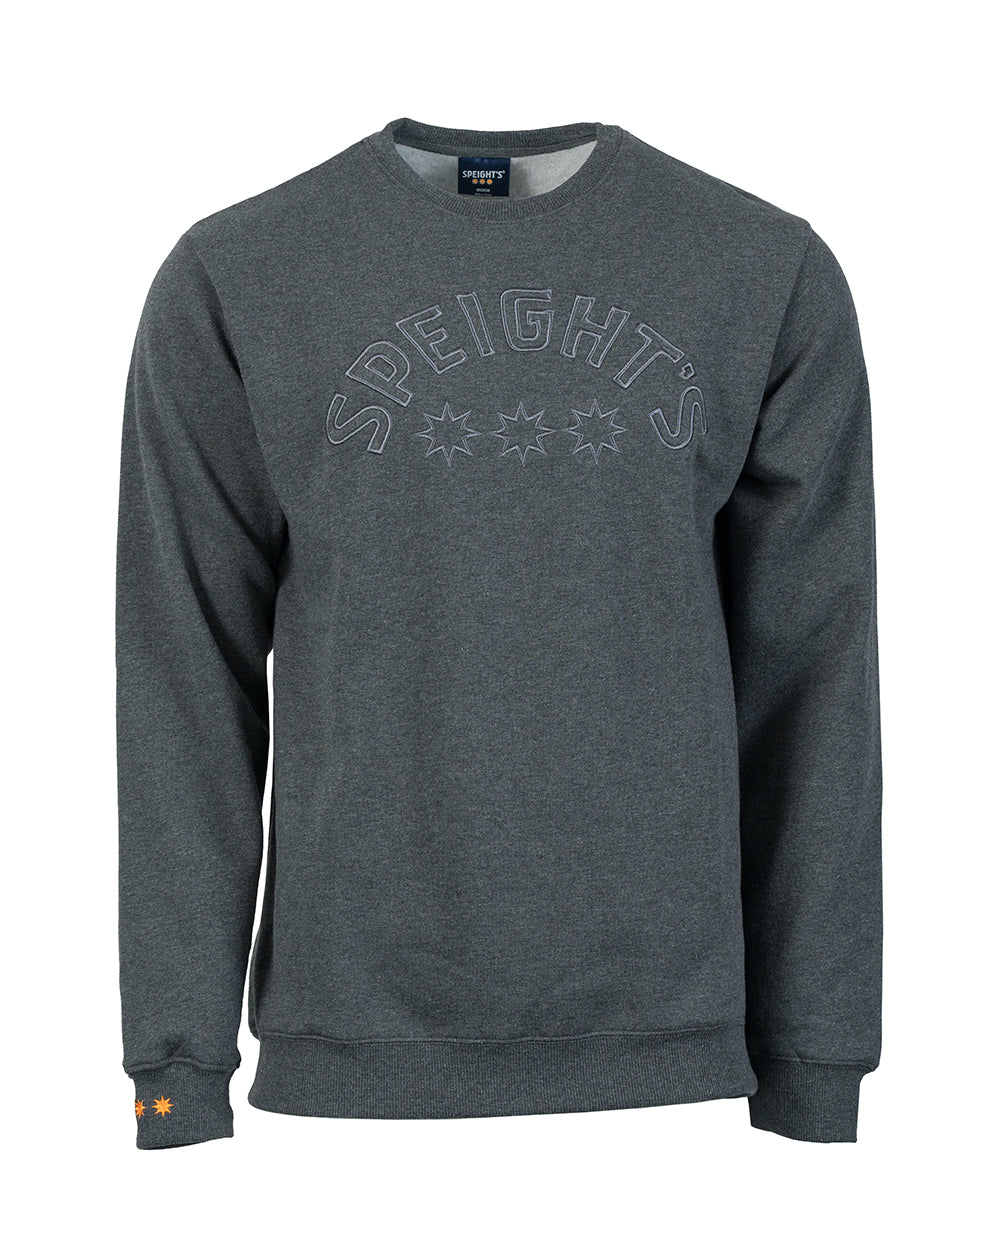 Speight's Crew Sweater -  Beer Gear Apparel & Merchandise - Speights - Lion Red - VB - Tokyo Dy merch